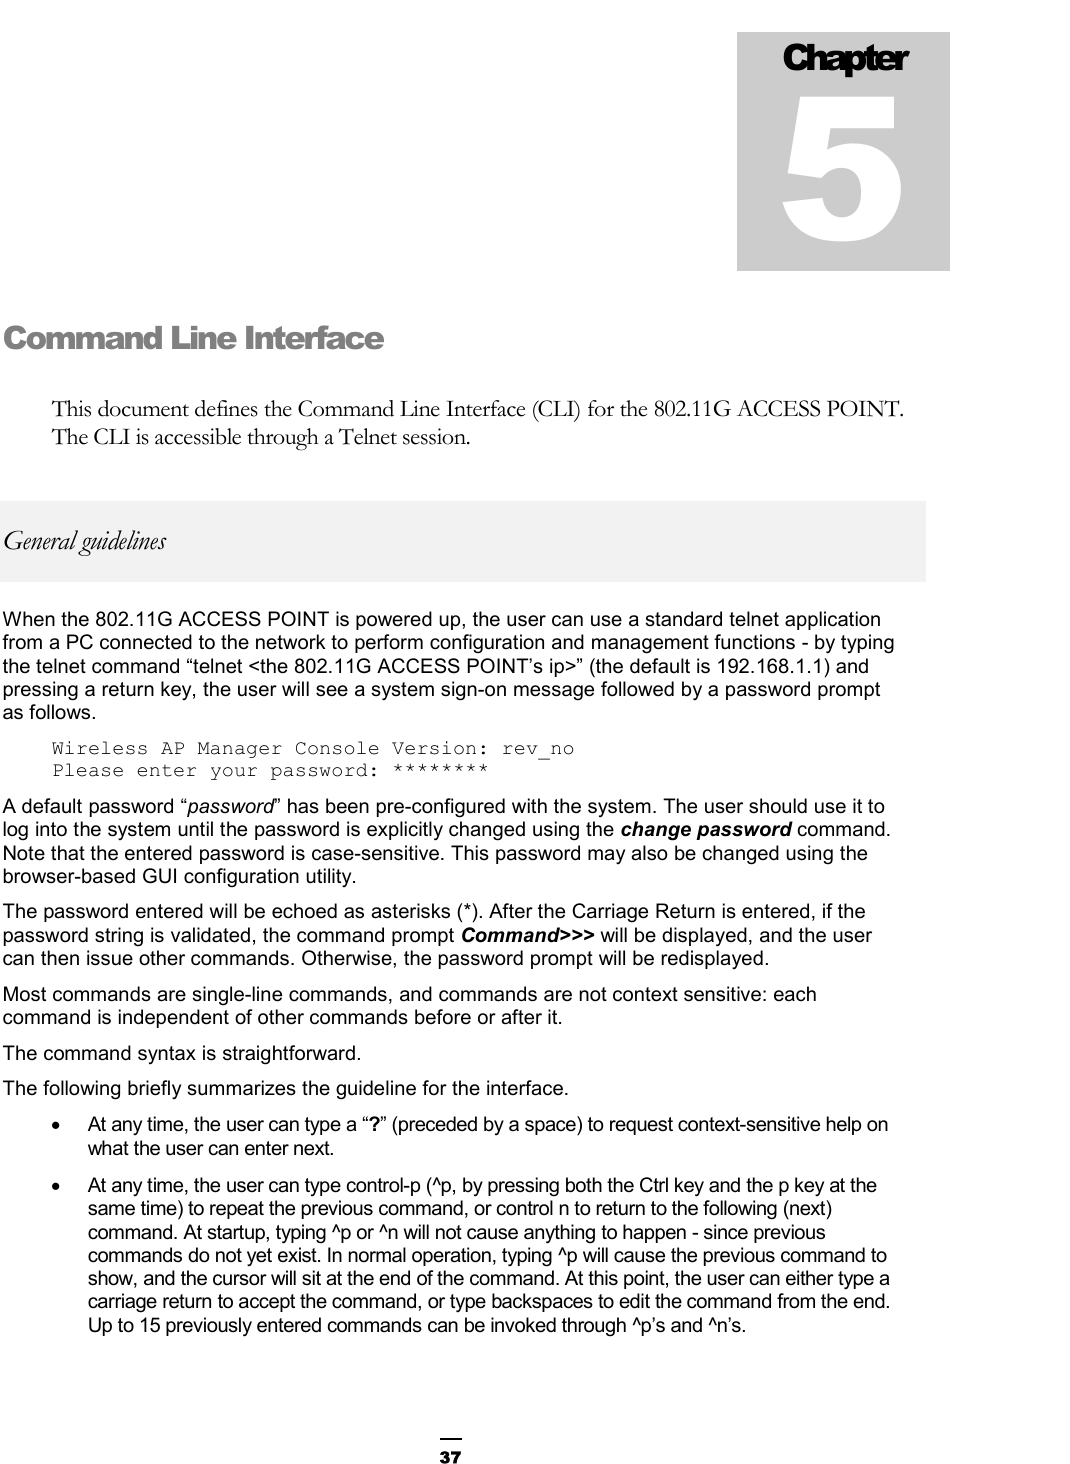  37Command Line Interface This document defines the Command Line Interface (CLI) for the 802.11G ACCESS POINT. The CLI is accessible through a Telnet session. General guidelines When the 802.11G ACCESS POINT is powered up, the user can use a standard telnet application from a PC connected to the network to perform configuration and management functions - by typing the telnet command “telnet &lt;the 802.11G ACCESS POINT’s ip&gt;” (the default is 192.168.1.1) and pressing a return key, the user will see a system sign-on message followed by a password prompt as follows. Wireless AP Manager Console Version: rev_no Please enter your password: ******** A default password “password” has been pre-configured with the system. The user should use it to log into the system until the password is explicitly changed using the change password command. Note that the entered password is case-sensitive. This password may also be changed using the browser-based GUI configuration utility. The password entered will be echoed as asterisks (*). After the Carriage Return is entered, if the password string is validated, the command prompt Command&gt;&gt;&gt; will be displayed, and the user can then issue other commands. Otherwise, the password prompt will be redisplayed. Most commands are single-line commands, and commands are not context sensitive: each command is independent of other commands before or after it. The command syntax is straightforward. The following briefly summarizes the guideline for the interface. •  At any time, the user can type a “?” (preceded by a space) to request context-sensitive help on what the user can enter next. •  At any time, the user can type control-p (^p, by pressing both the Ctrl key and the p key at the same time) to repeat the previous command, or control n to return to the following (next) command. At startup, typing ^p or ^n will not cause anything to happen - since previous commands do not yet exist. In normal operation, typing ^p will cause the previous command to show, and the cursor will sit at the end of the command. At this point, the user can either type a carriage return to accept the command, or type backspaces to edit the command from the end.  Up to 15 previously entered commands can be invoked through ^p’s and ^n’s. Chapter 5 